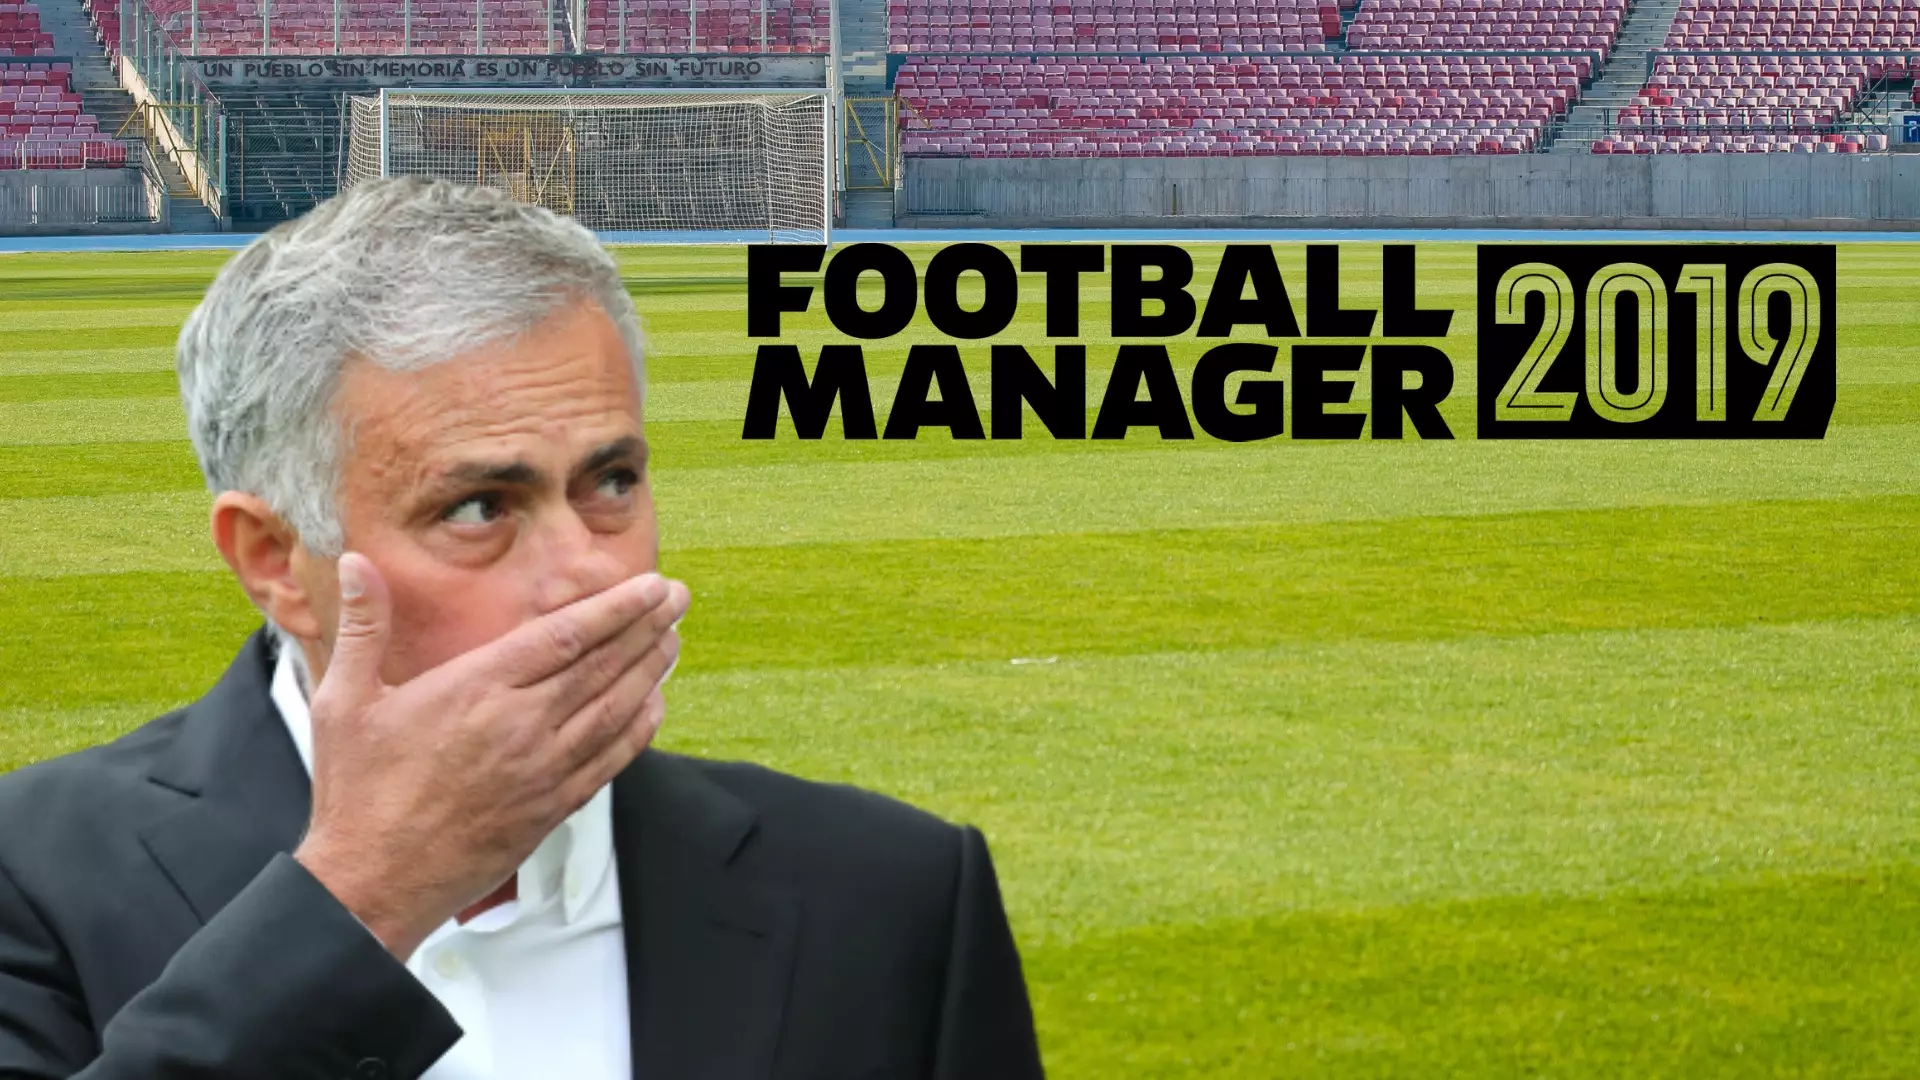 Football Manager 2019 Predicts José Mourinho’s Managerial Career For The Next Six Years